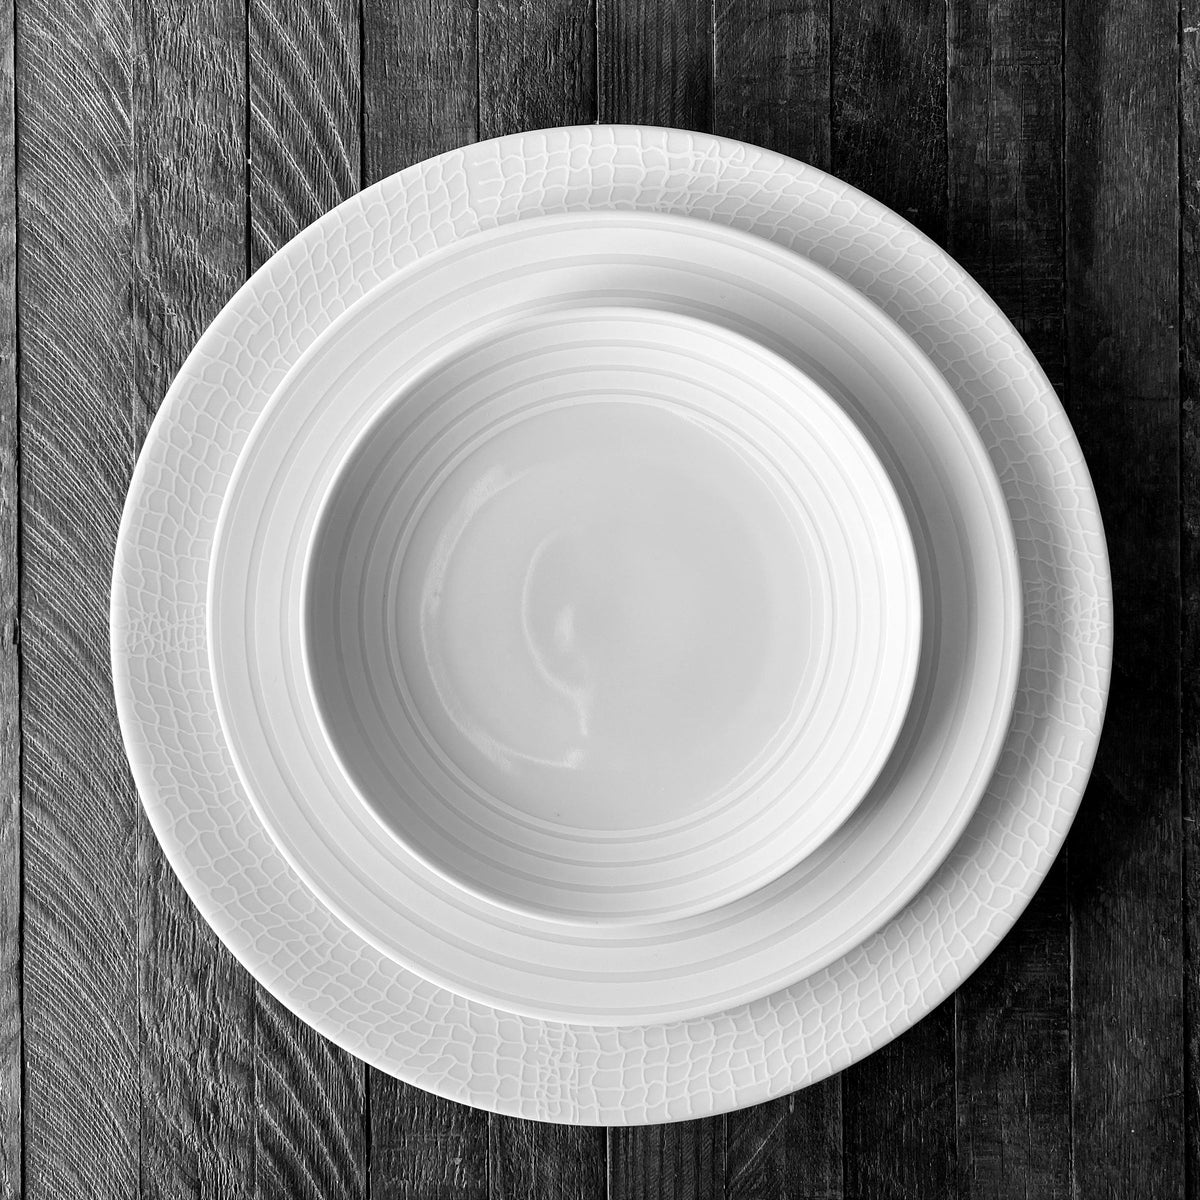 A white plate and bowl on a wooden table. The boxed set includes the Cambridge Stripe Canapé Plates, perfect for enhancing your dining experience.